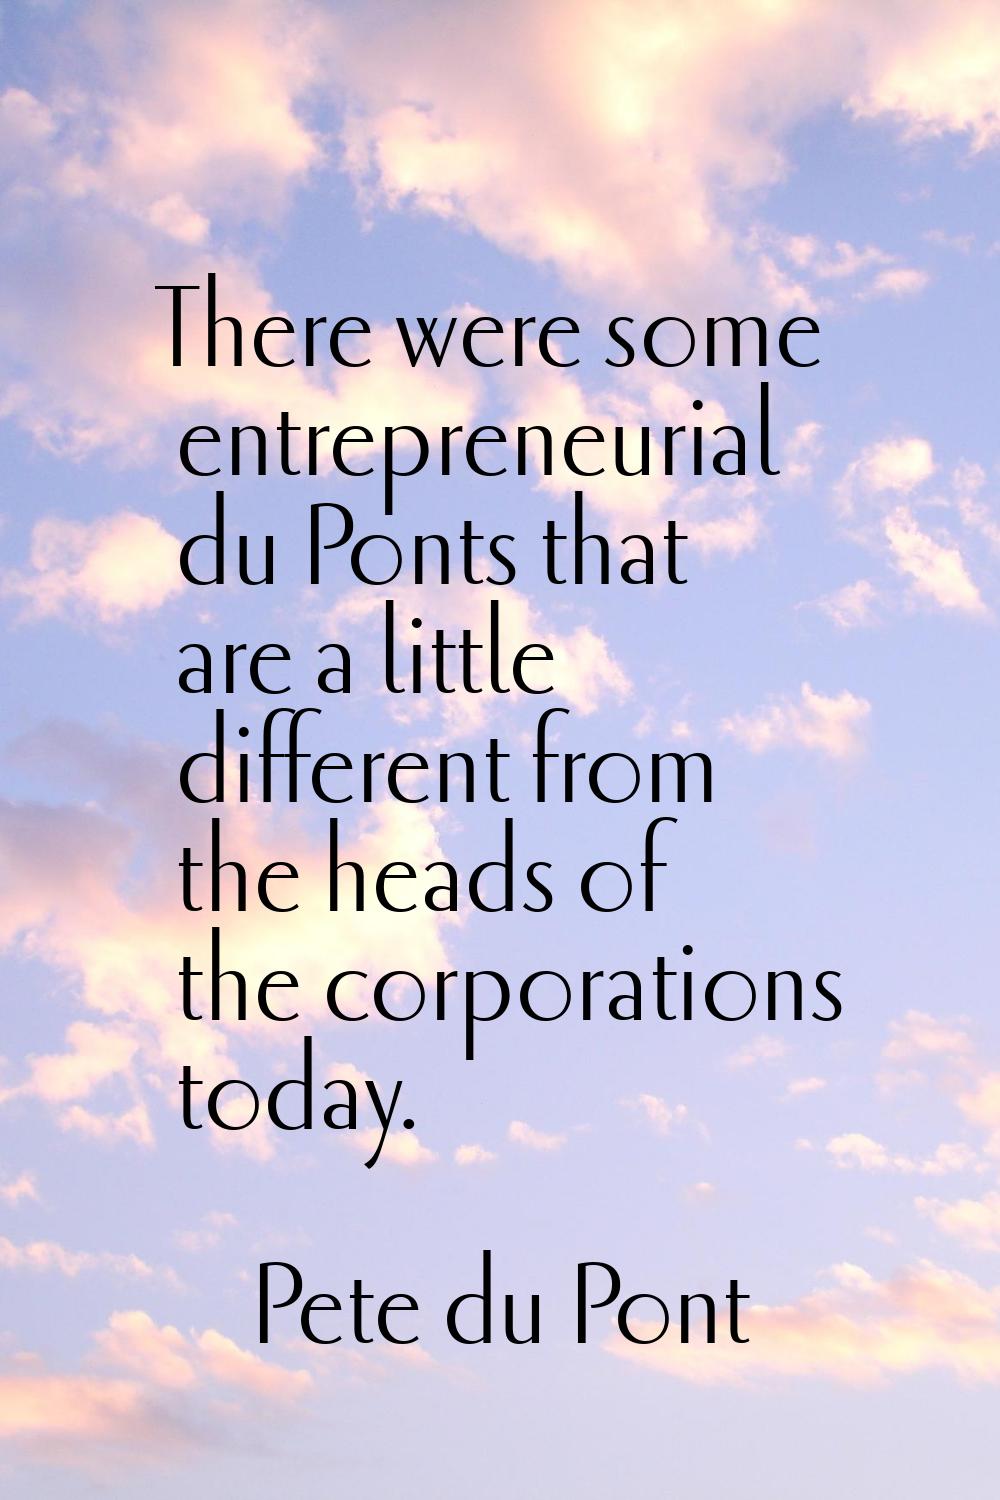 There were some entrepreneurial du Ponts that are a little different from the heads of the corporat